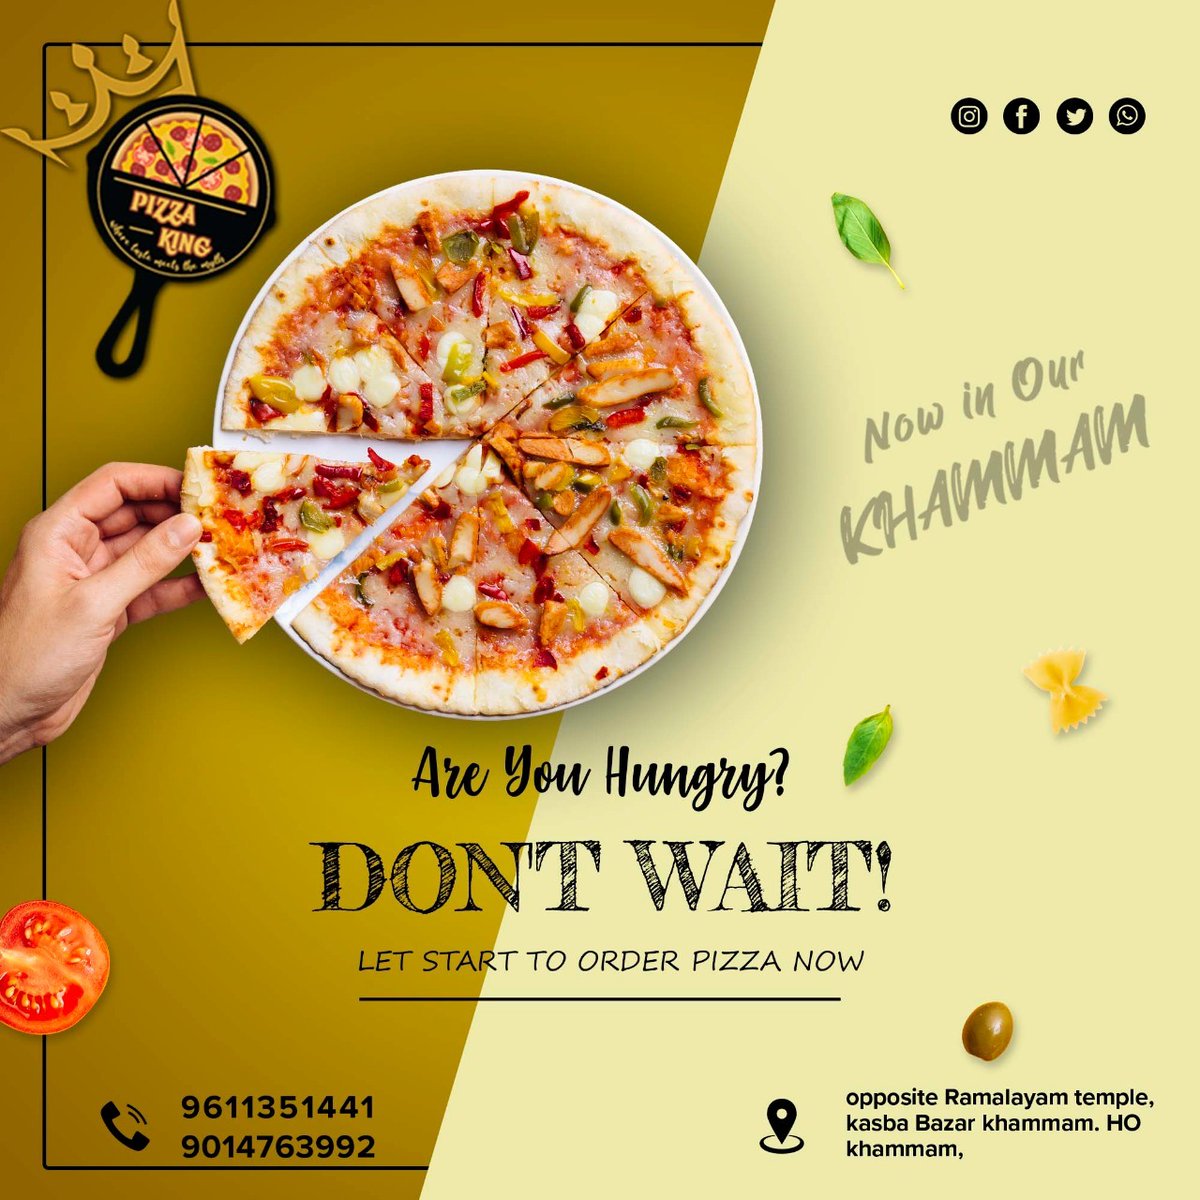 There's very little in my world that a foot massage and a thin-crust, everything-on-it pizza won't set right.”
Contact us : +9611351441
#Pizzaking  #Delicioues #Khammam #PizzaKhammam  #PizzaLovers #VegPizza #NonvegPizza #Cornpizza #AlltypePizza #Telengana #pizzalove #pizz #pizza